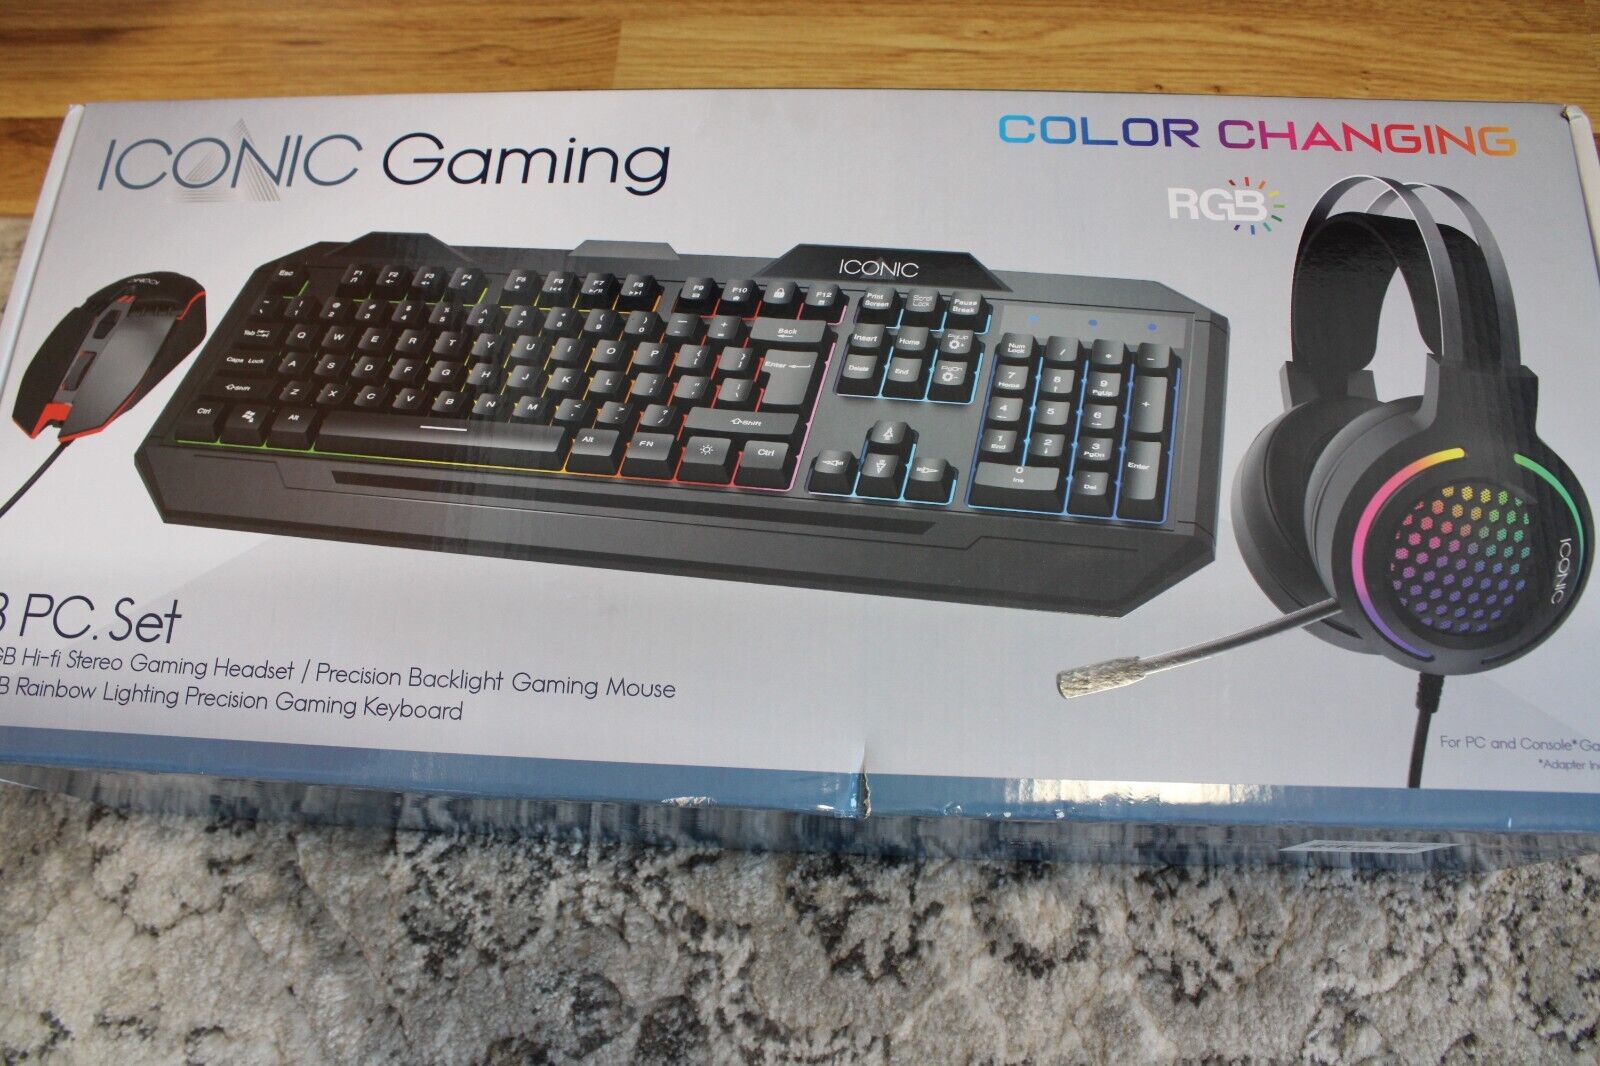 RGB Iconic Color Changing LED  3 Pc Gaming Set - Keyboard,  Mouse & Headset New